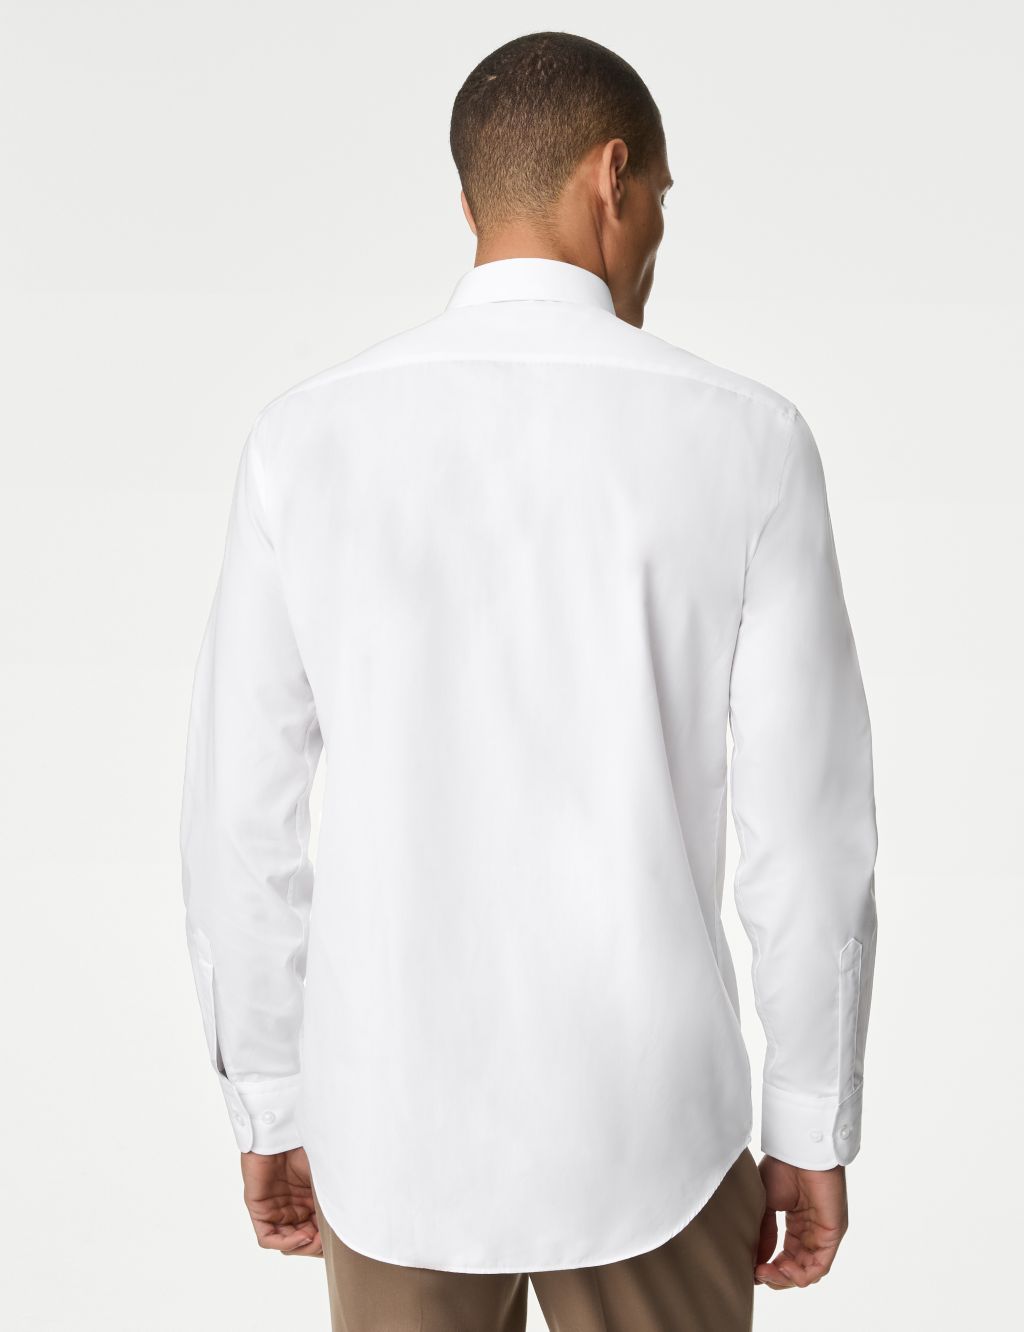 3pk Tailored Fit Long Sleeve Shirts image 2